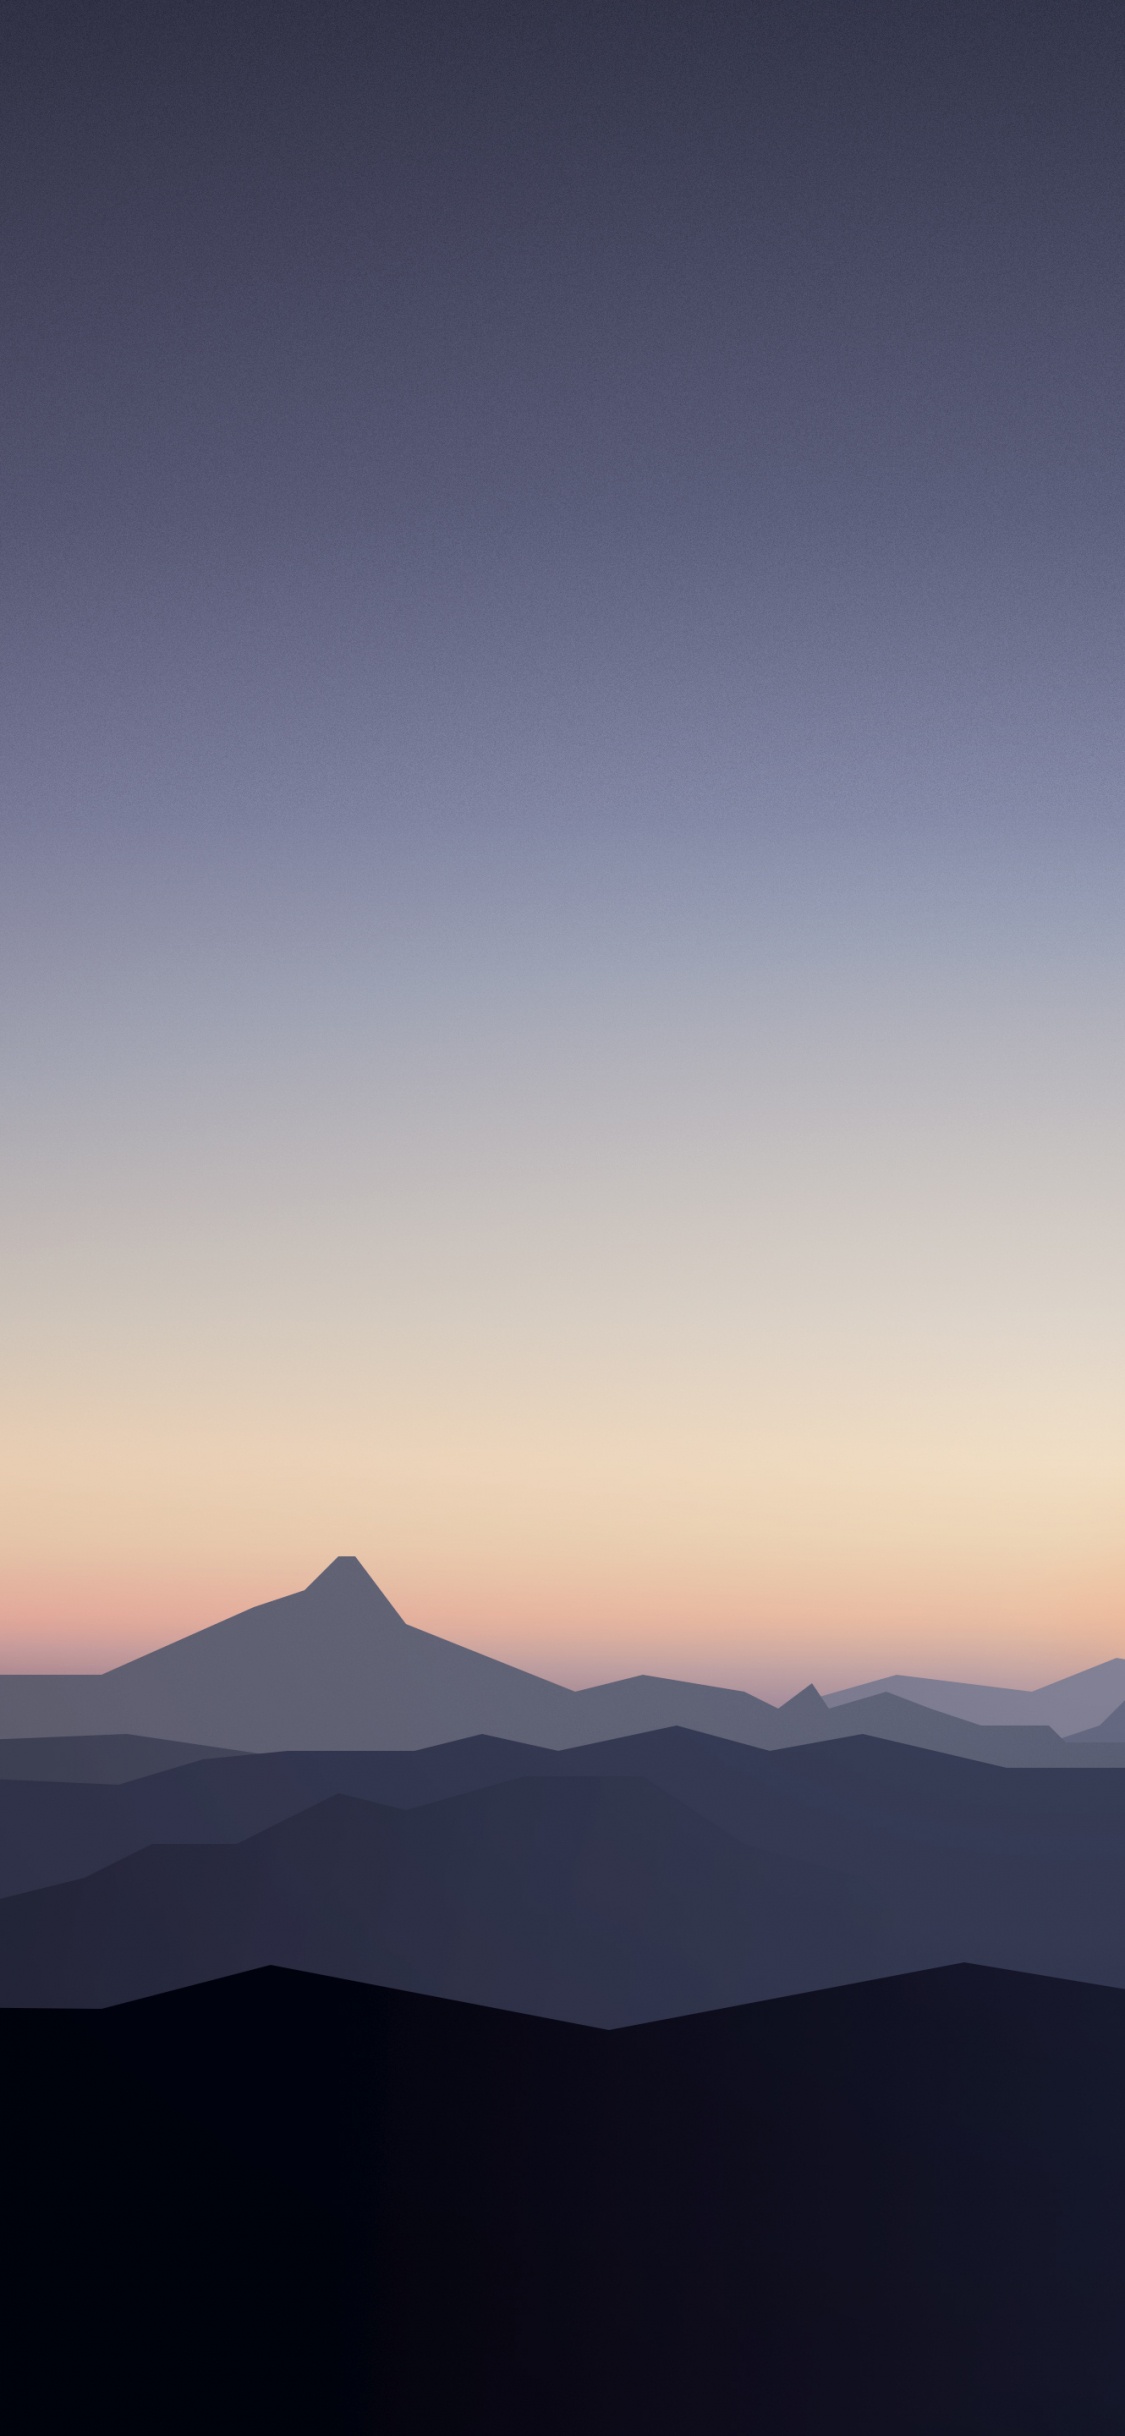 Silhouette of Mountains During Sunset. Wallpaper in 1125x2436 Resolution